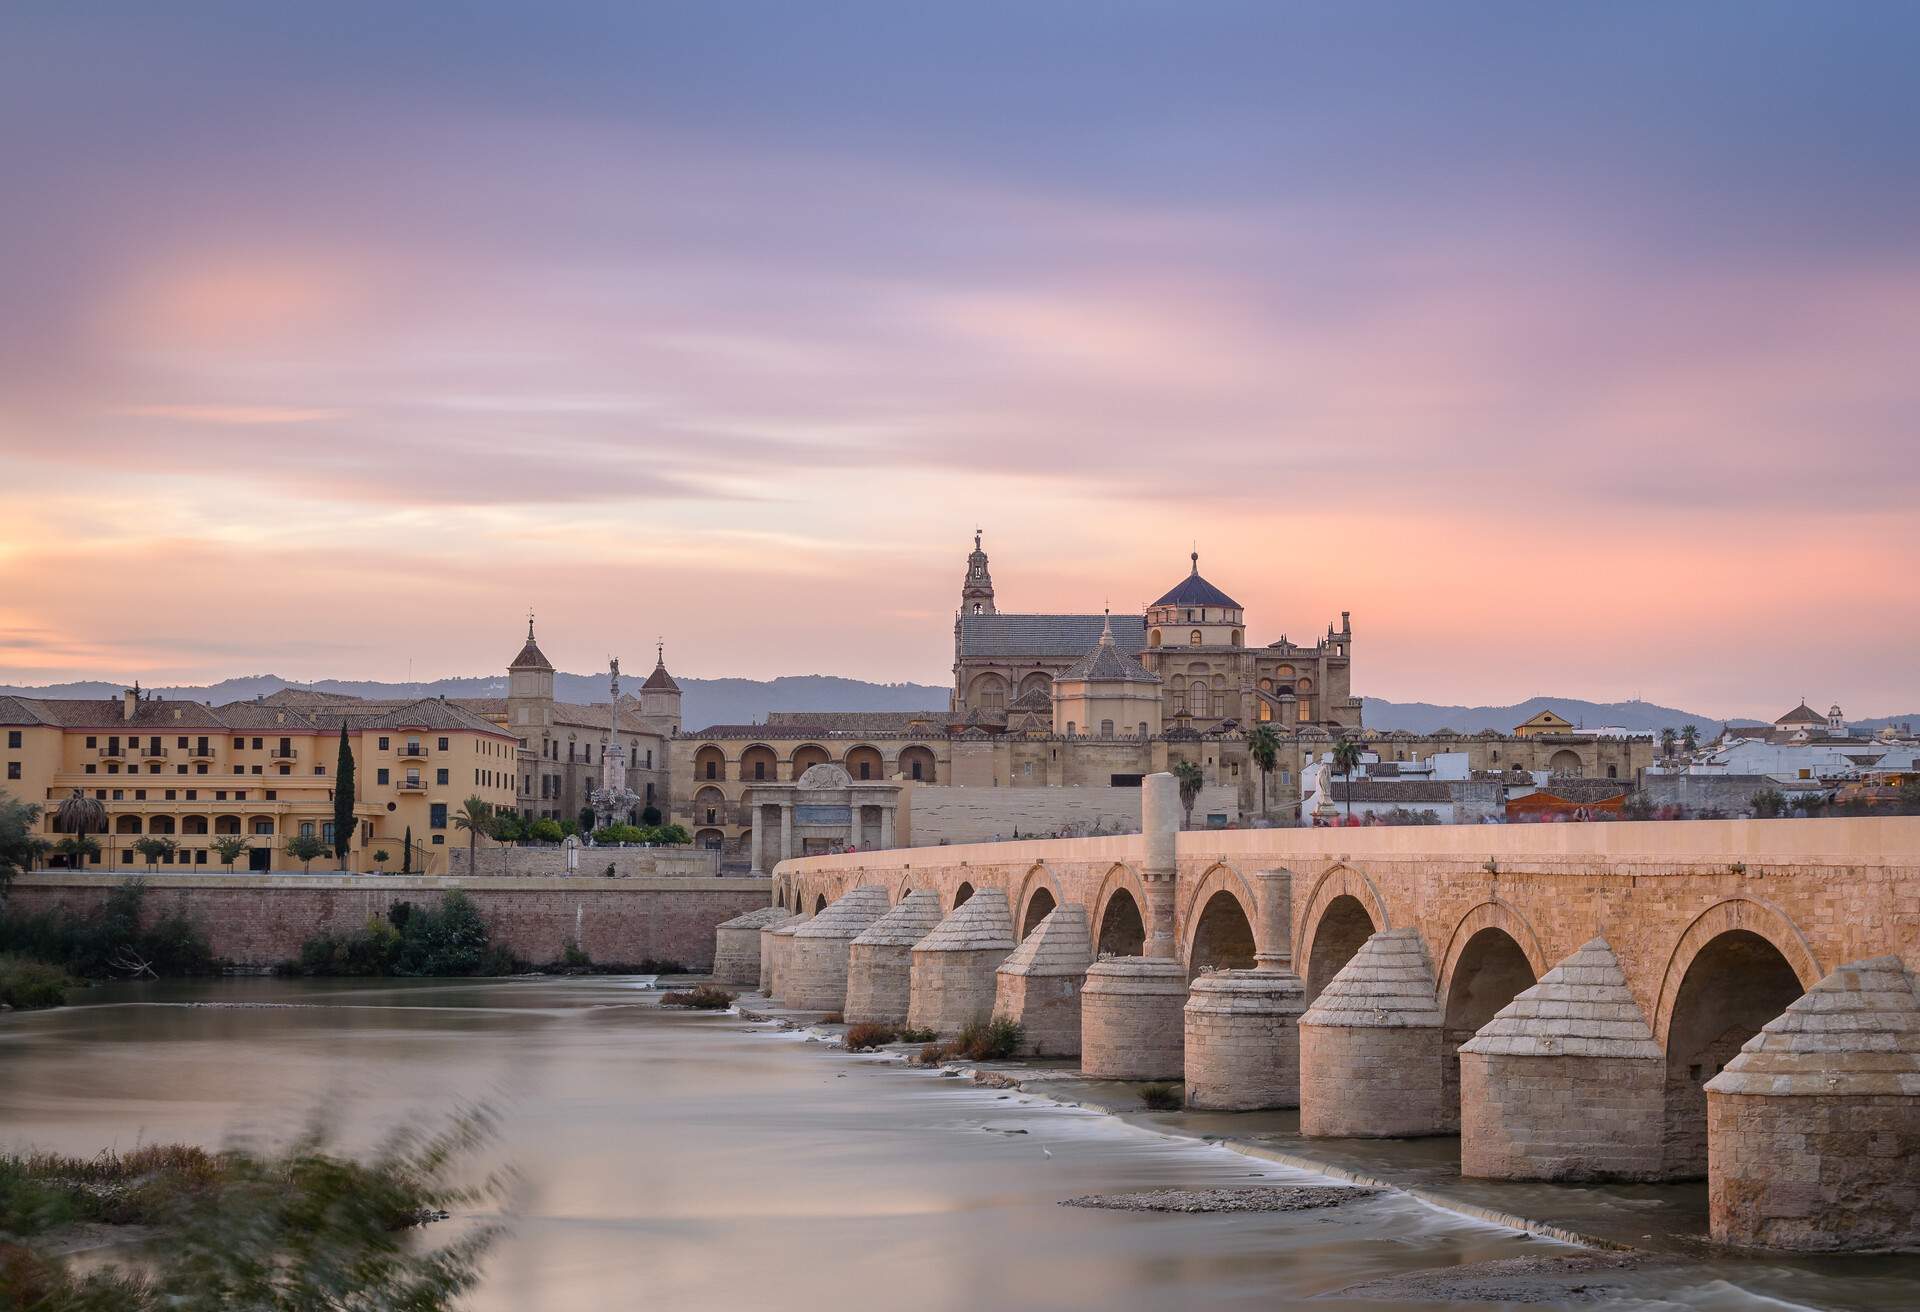 A long exposure of the sunset colours over Cordoba's Mezquita and Roman bridge.